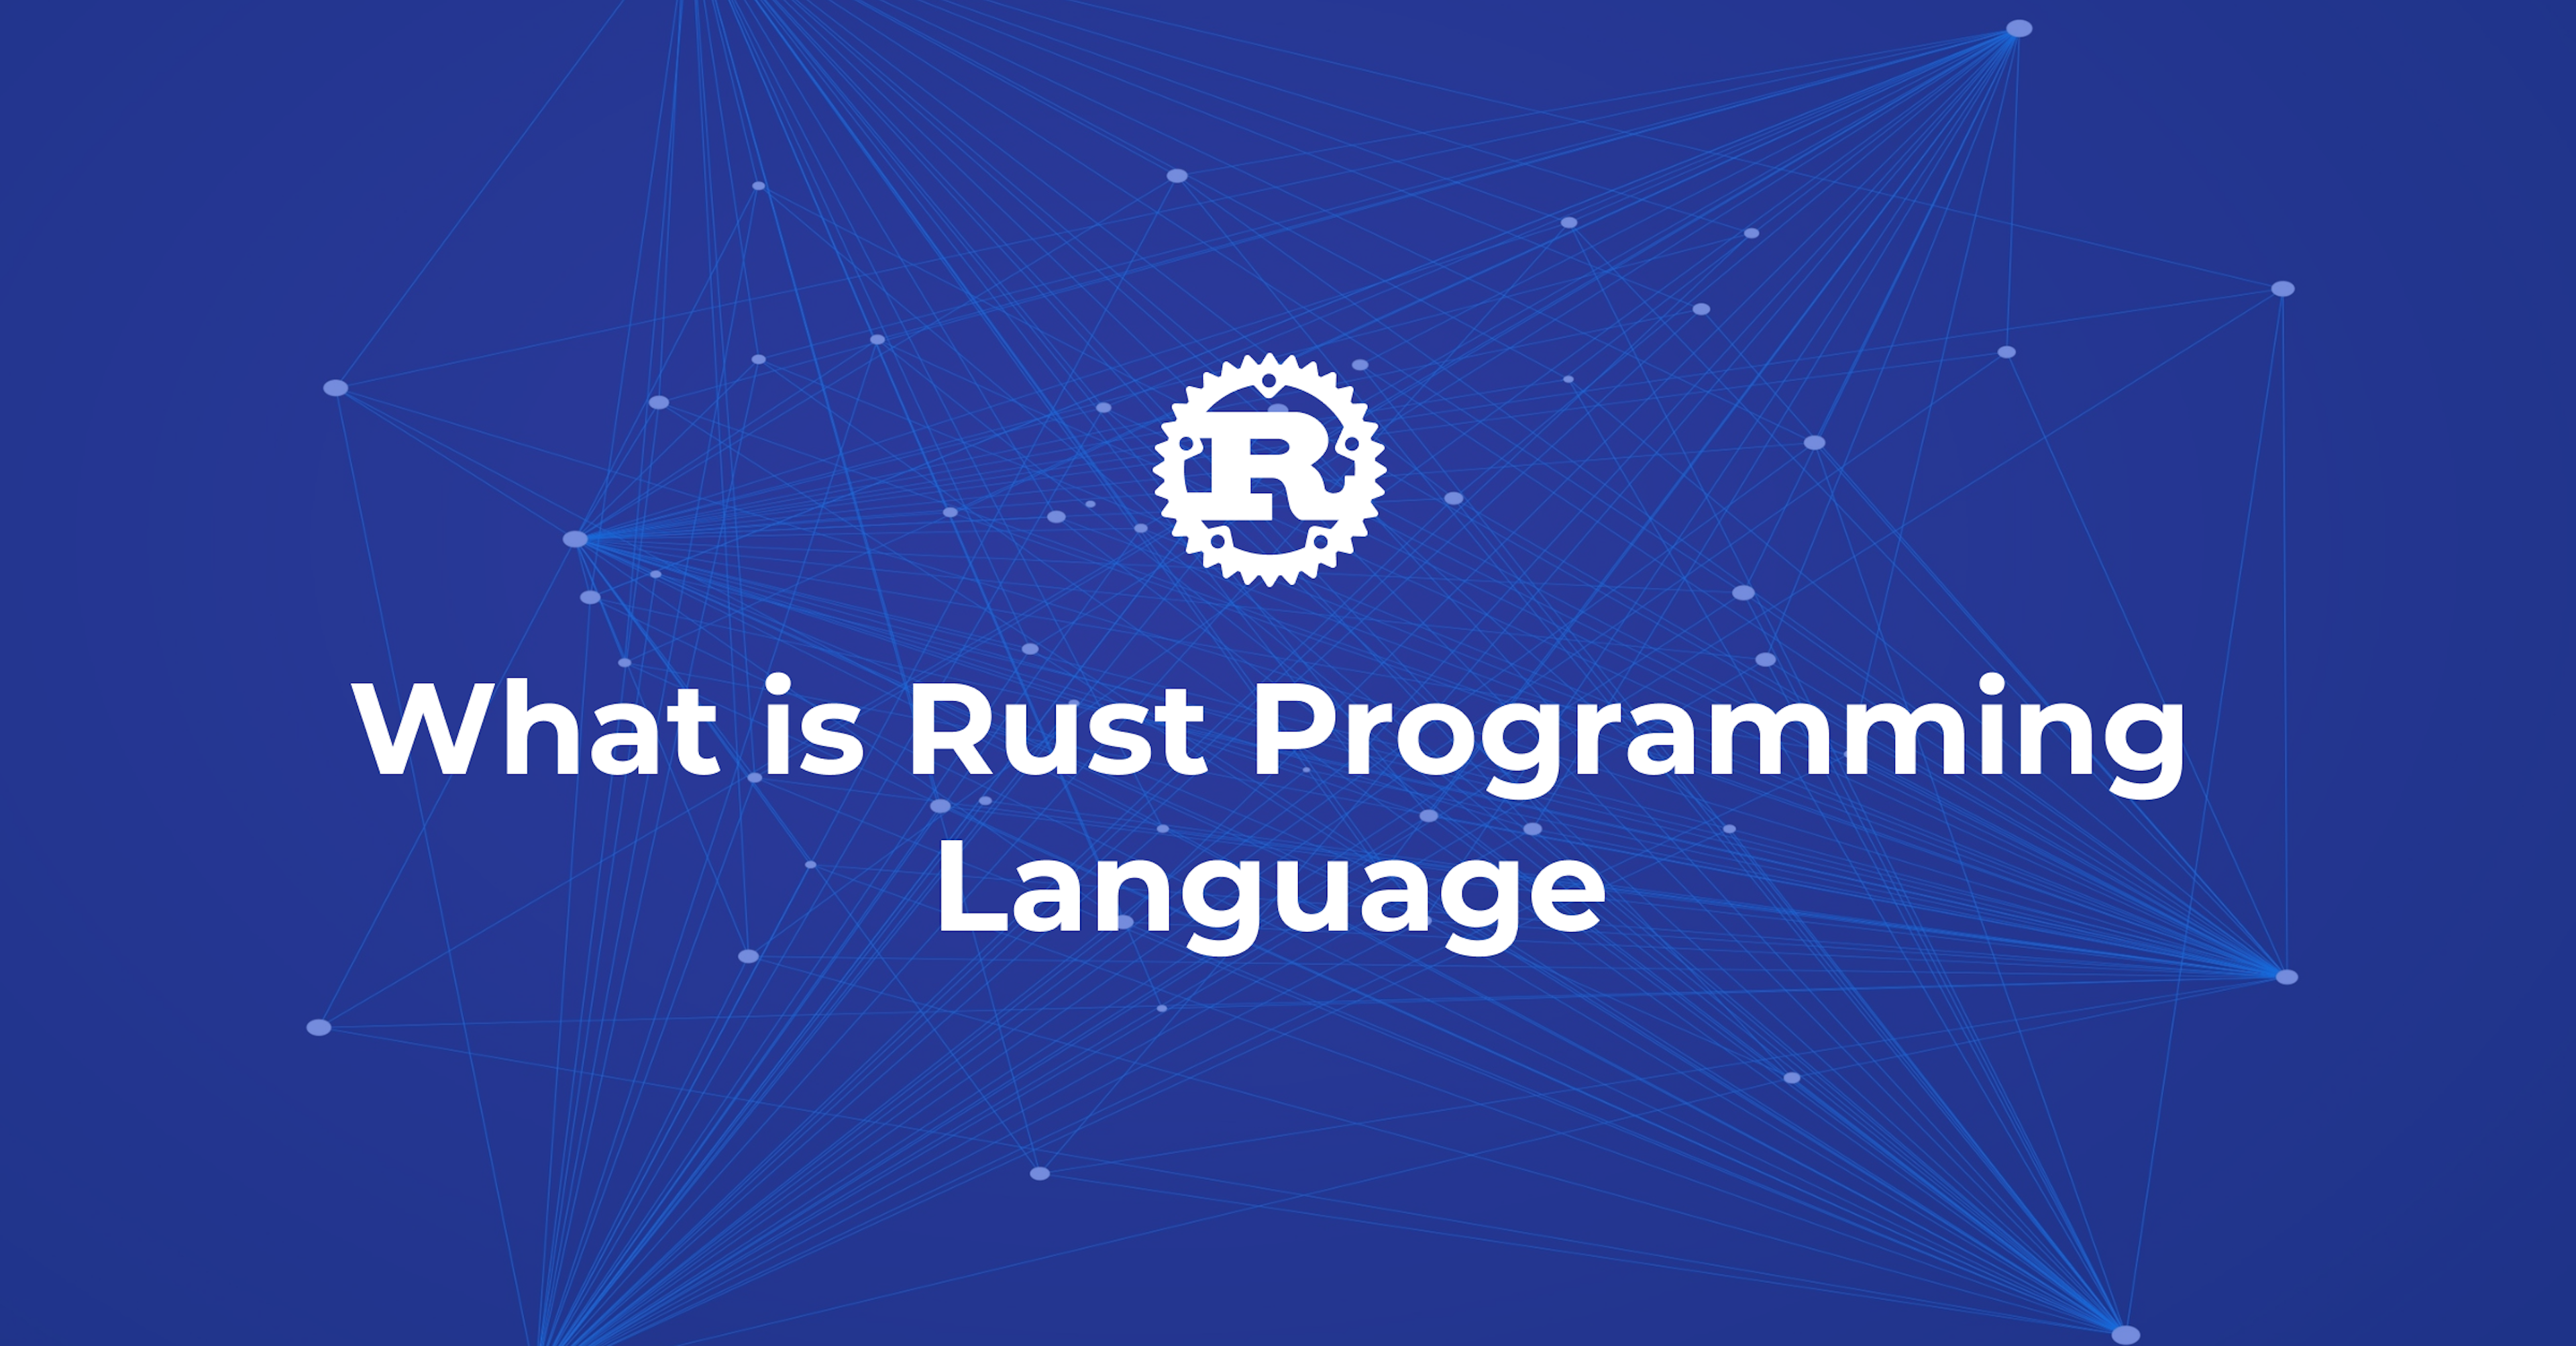 What is Rust Programming Language and Why it is Popular